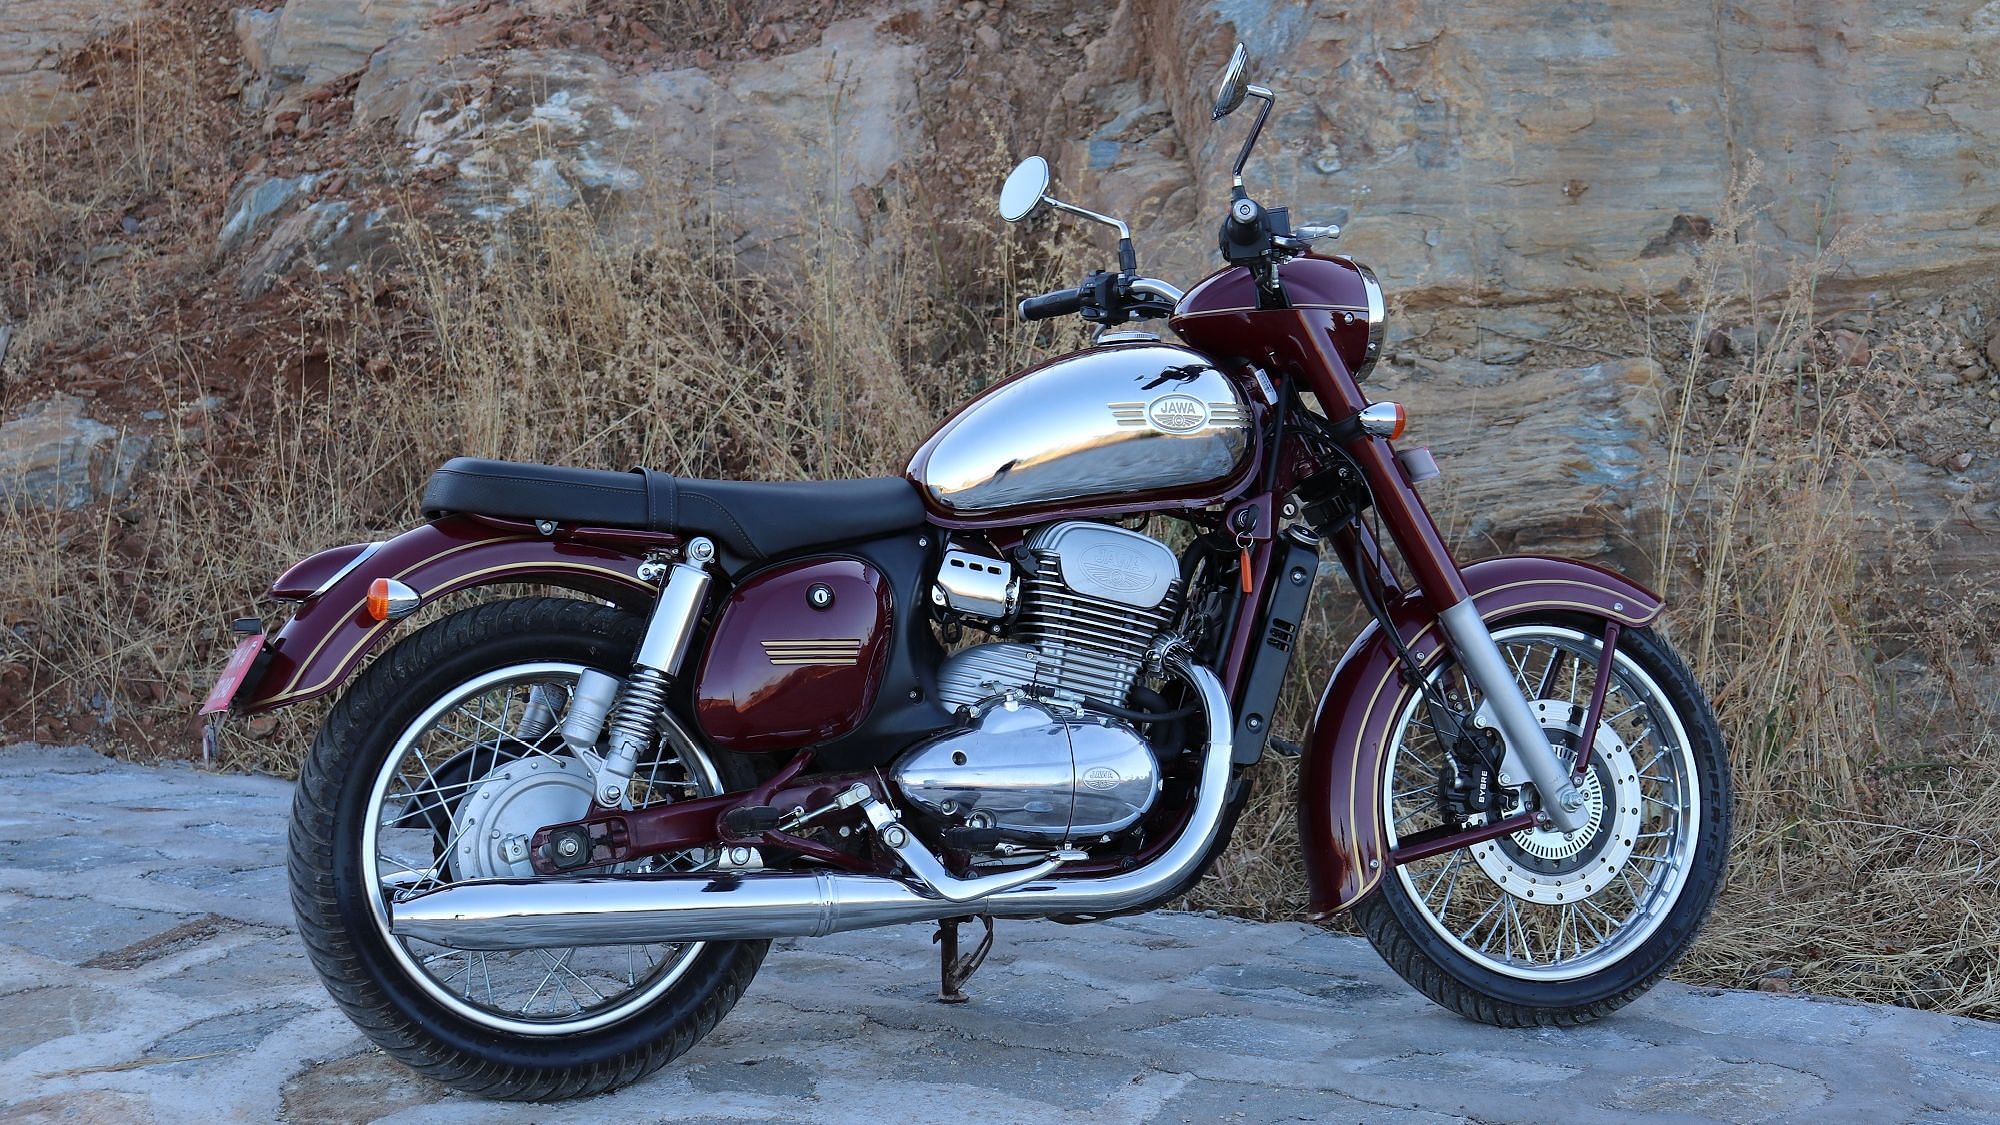 The Jawa (classic) is priced at Rs 1.64 lakh ex-showroom.&nbsp;